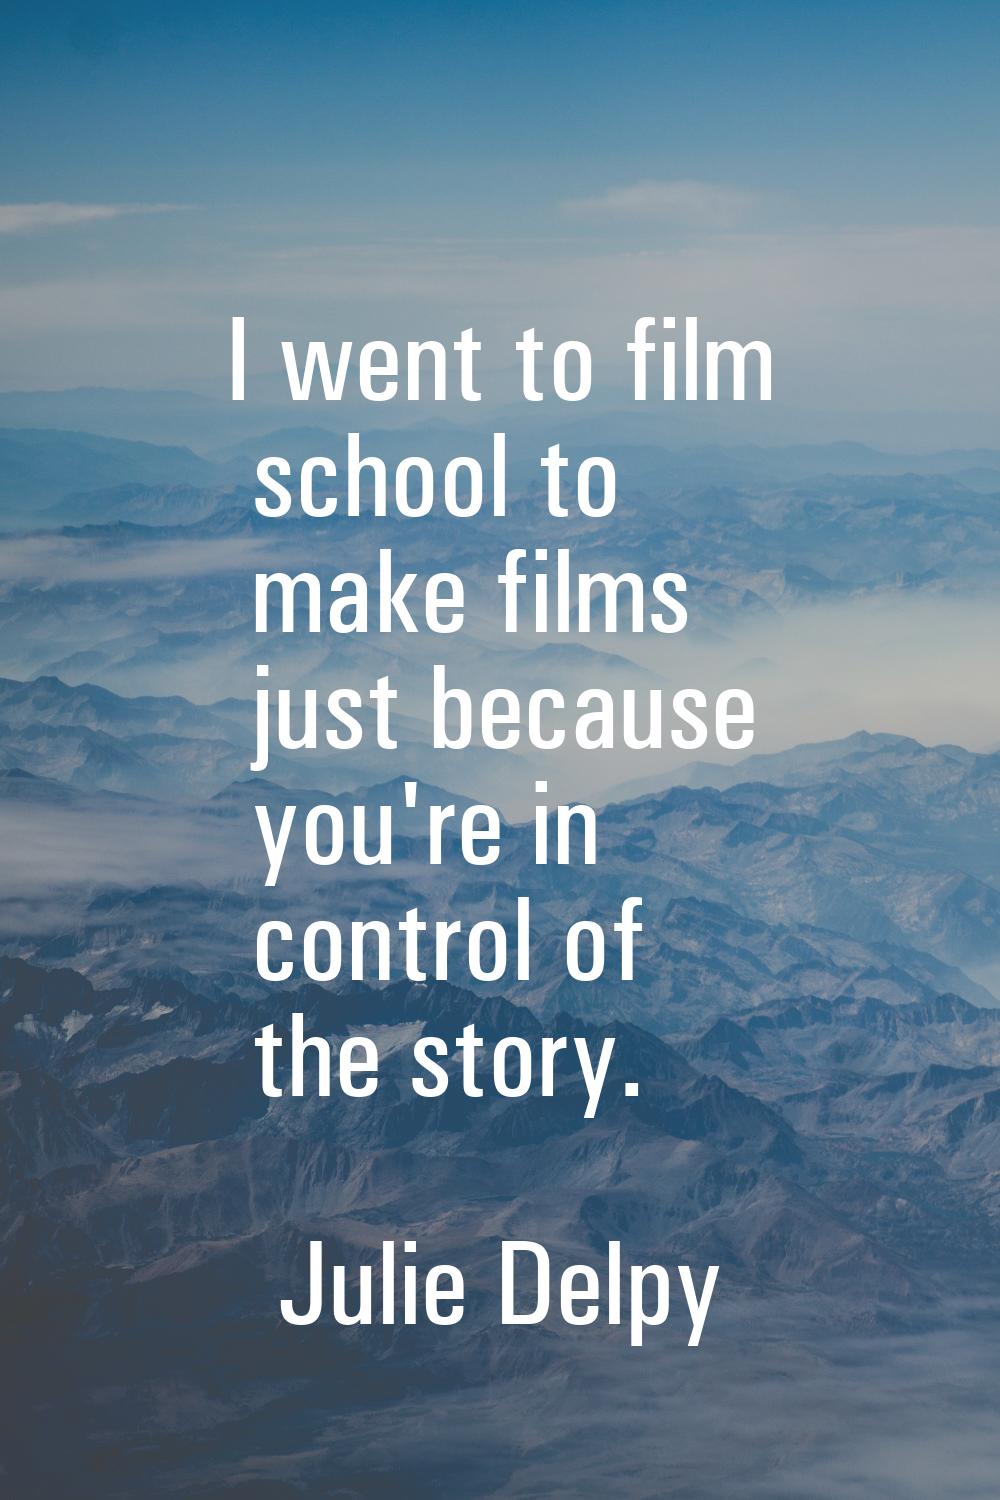 I went to film school to make films just because you're in control of the story.